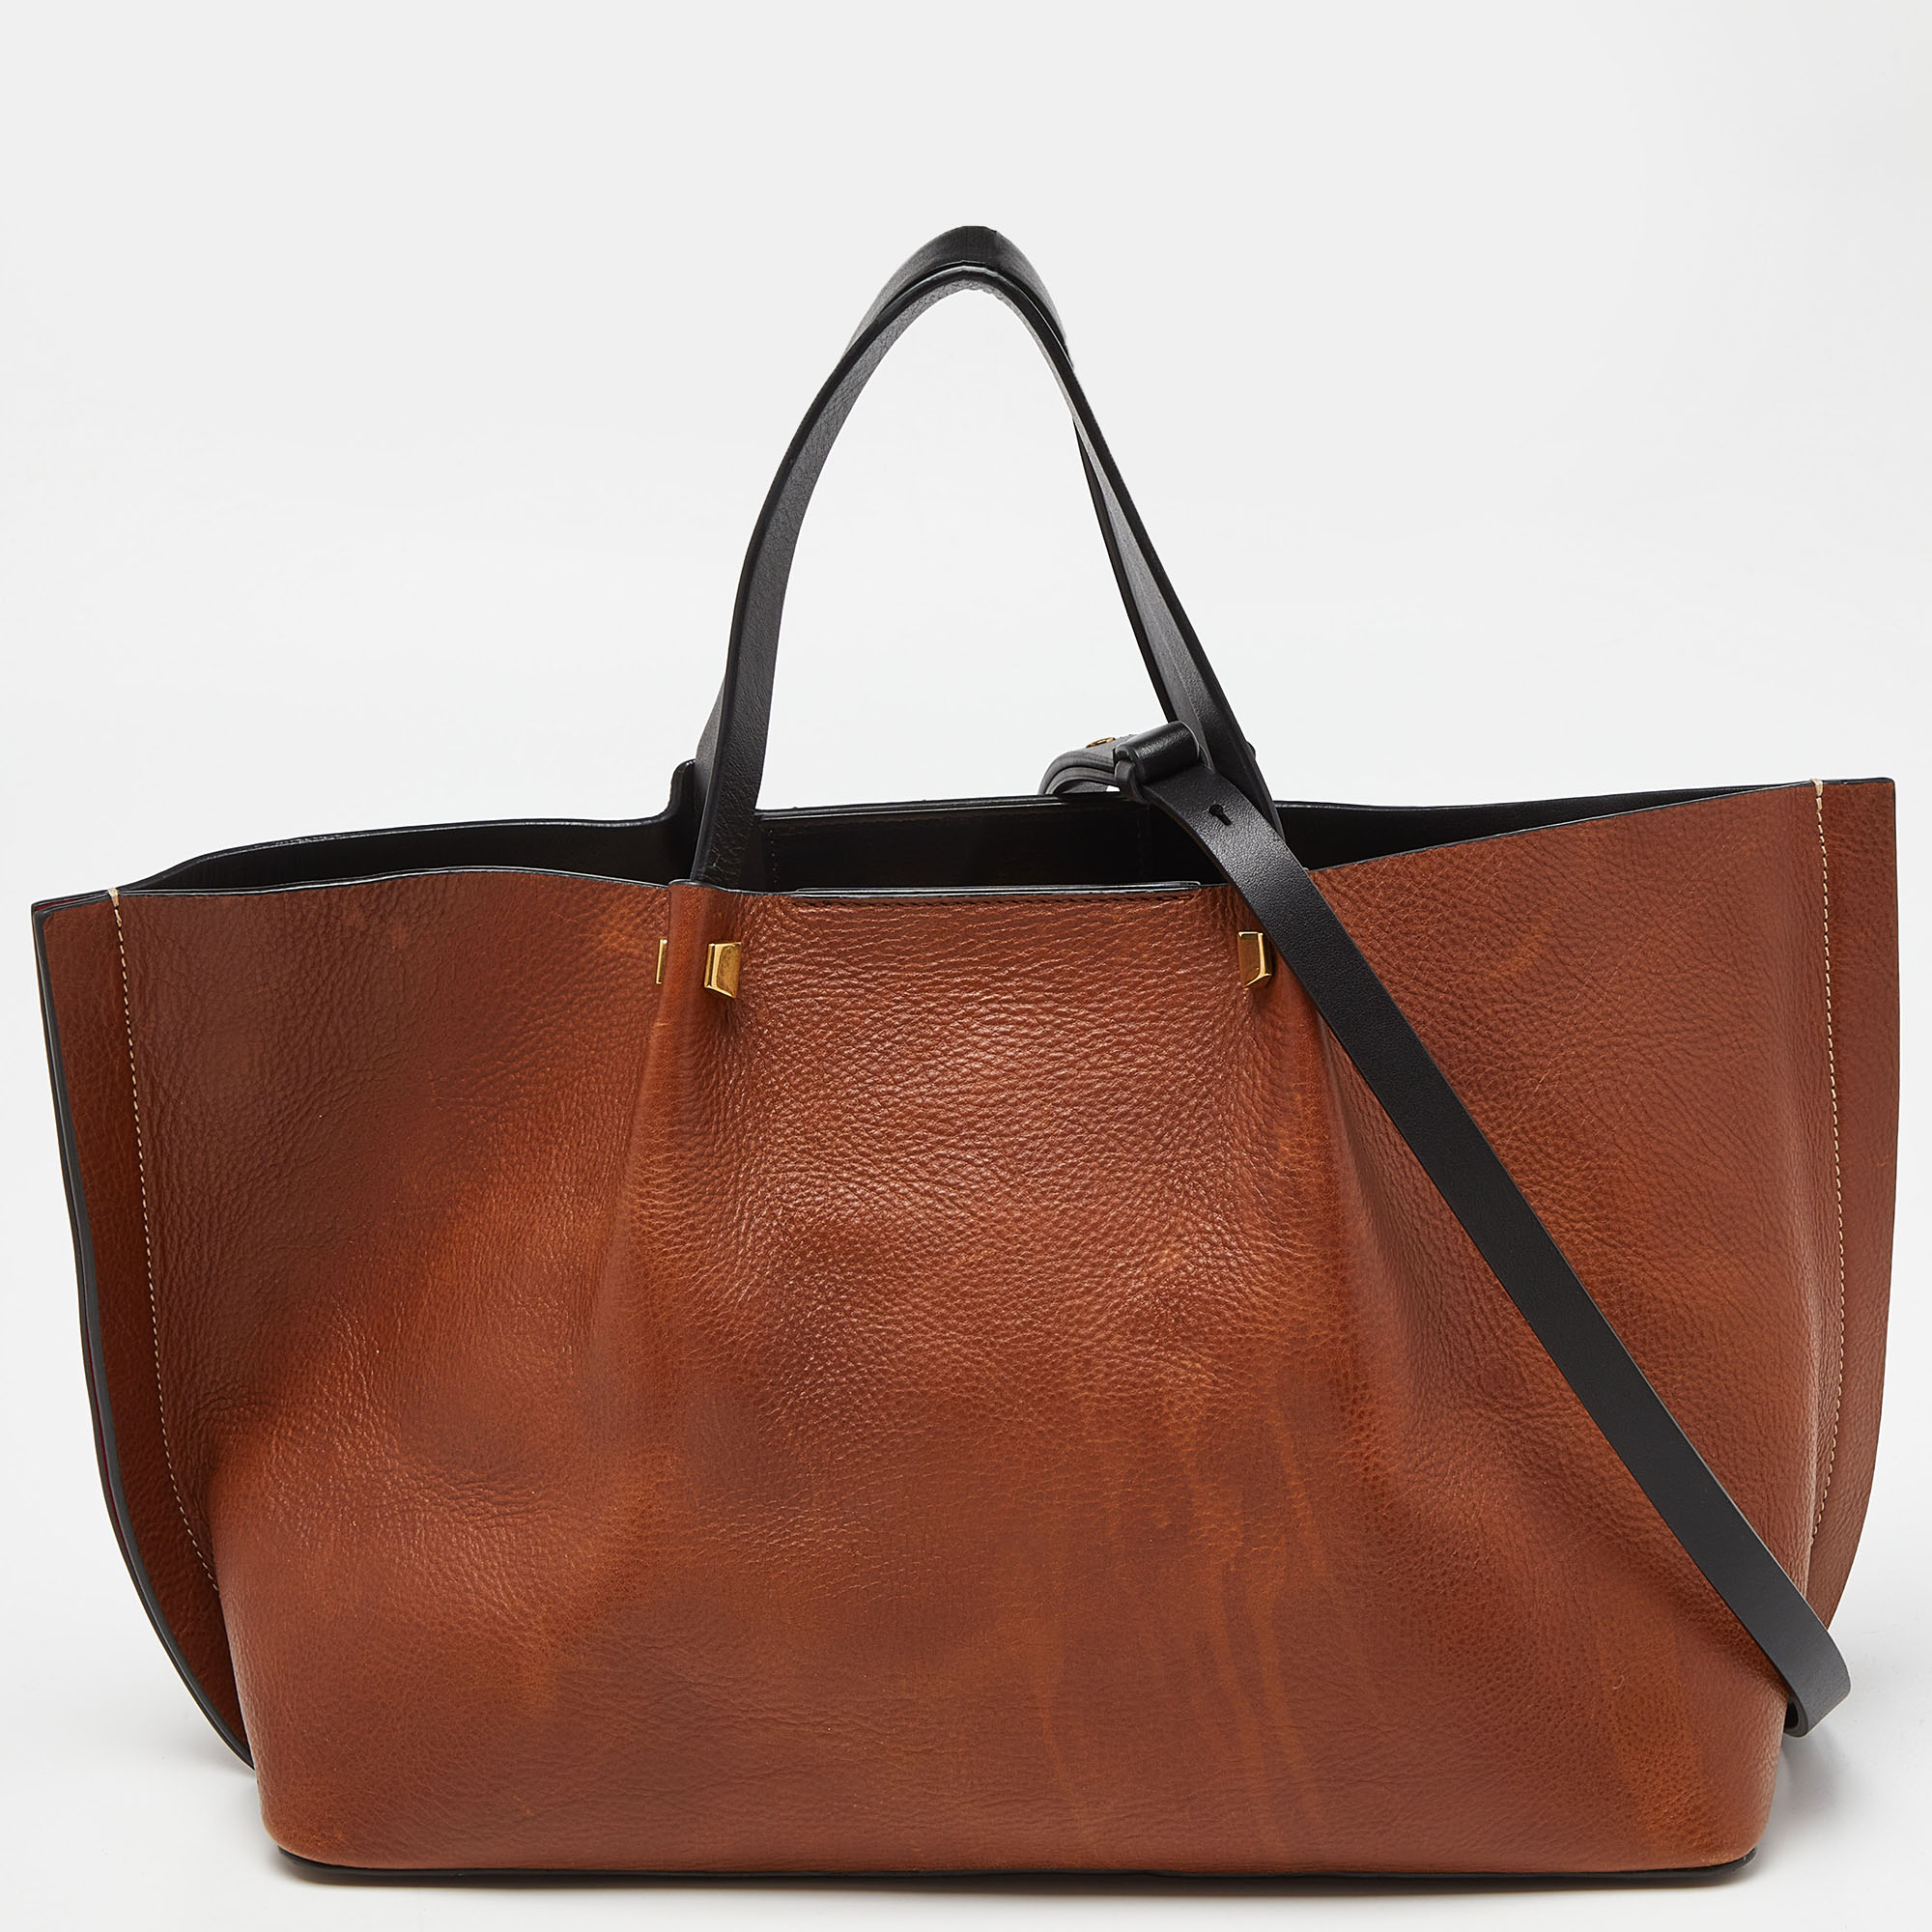 This Escape tote from Valentino represents a dialogue between innovation and tradition and will be your everyday companion. Made from fine leather it features two top handles an optional shoulder strap and a spacious interior to store your belongings.